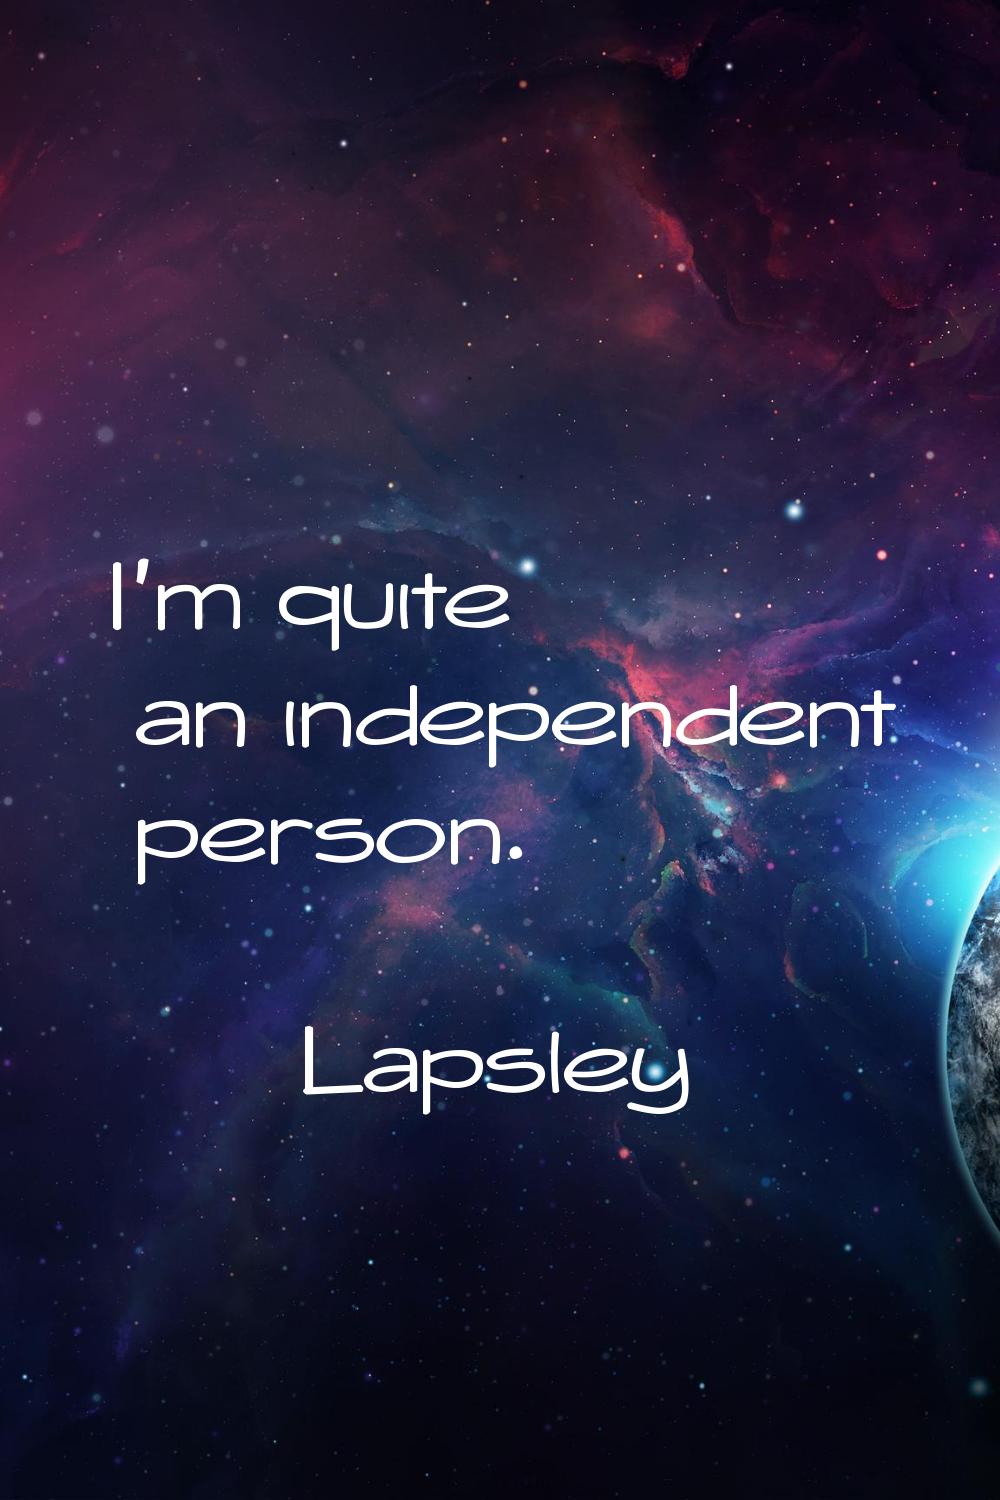 I'm quite an independent person.